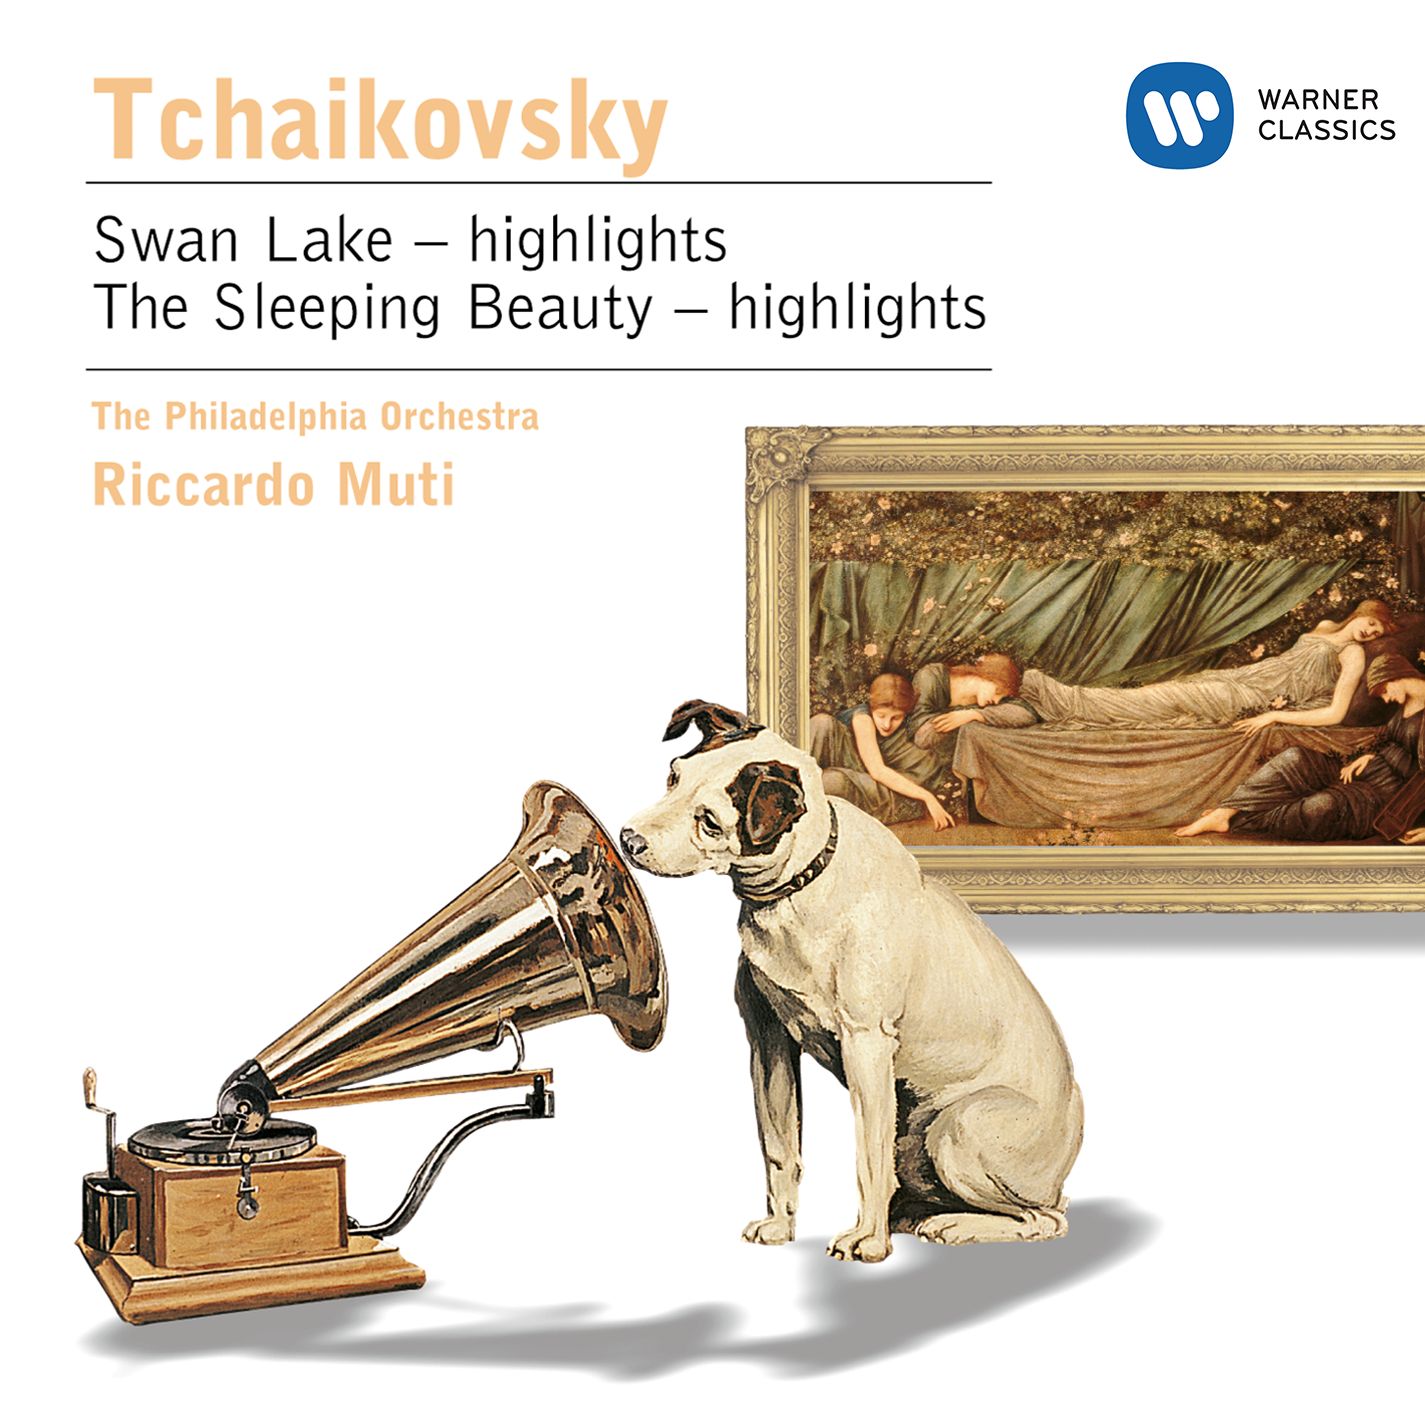 Suite from Swan Lake, Op. 20a:III. Dance of the Little Swans